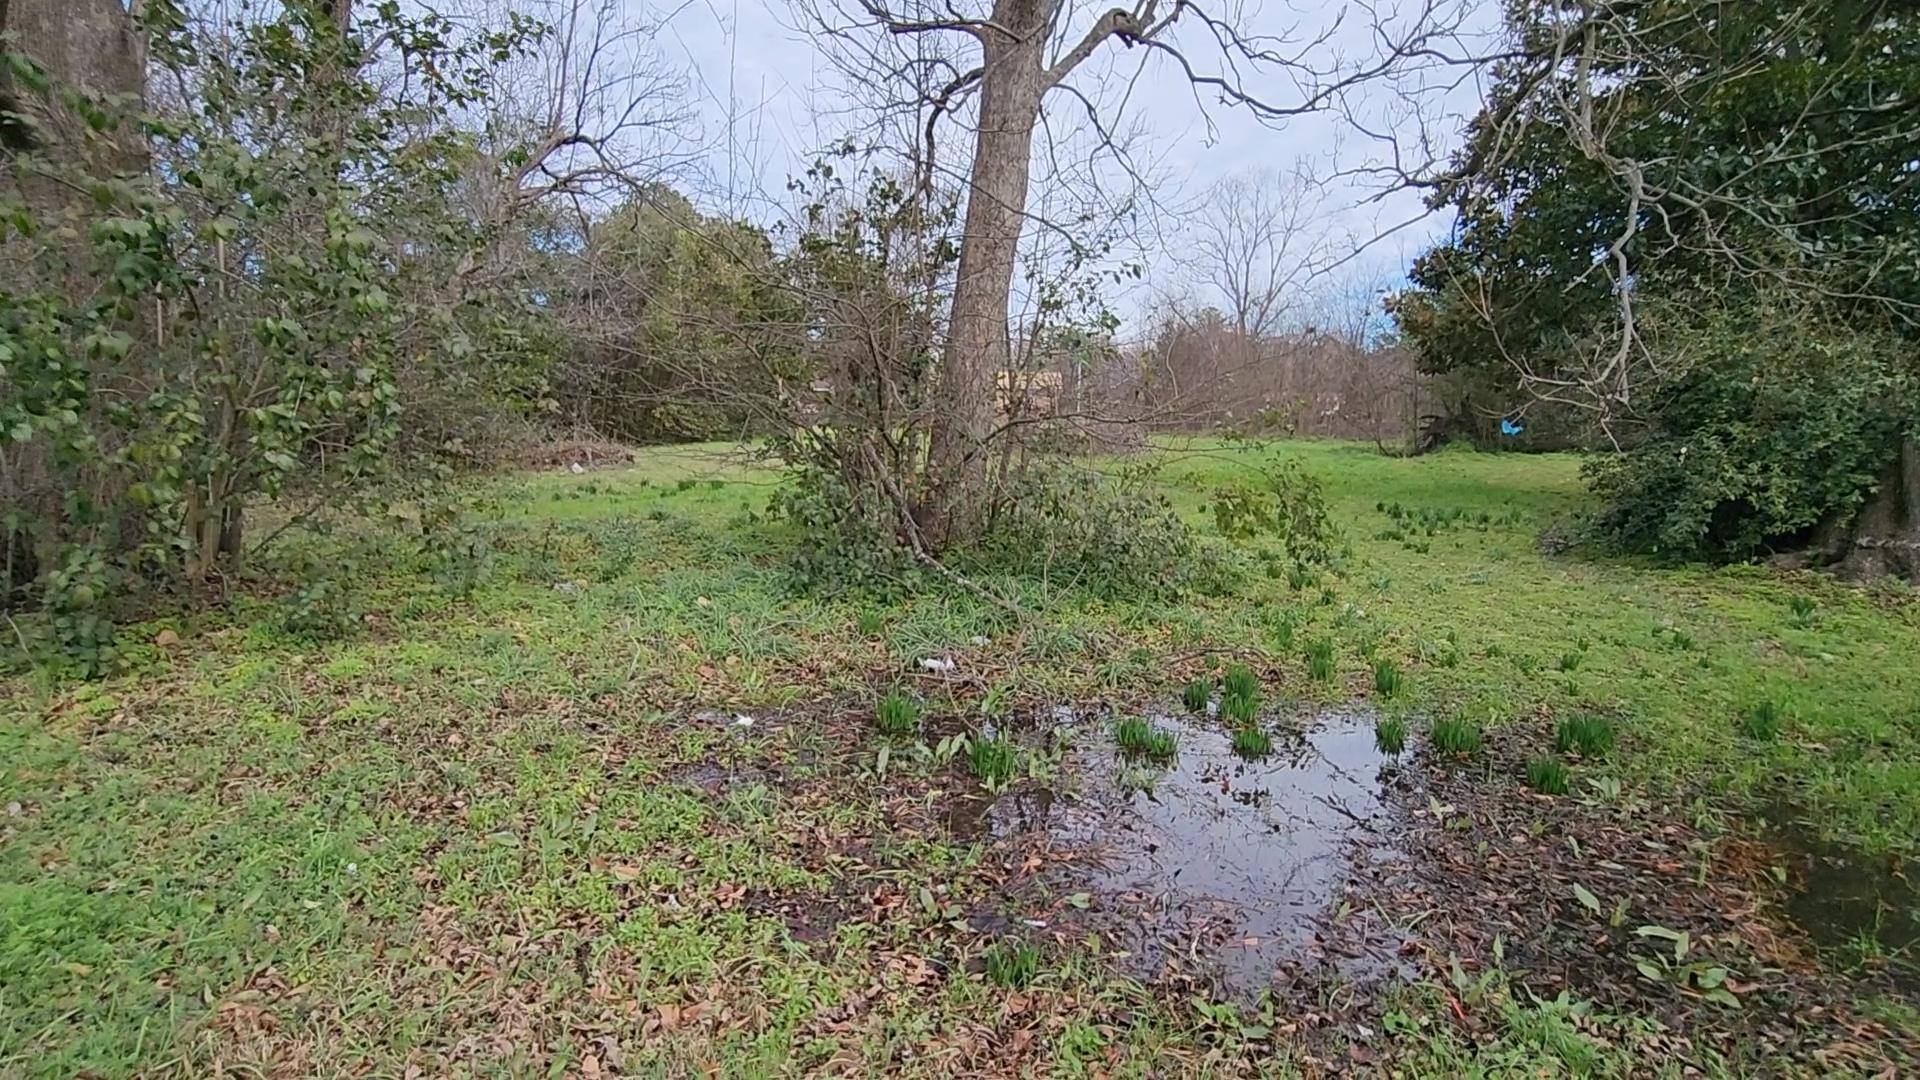 A swamp with a tree in middle and grass all around